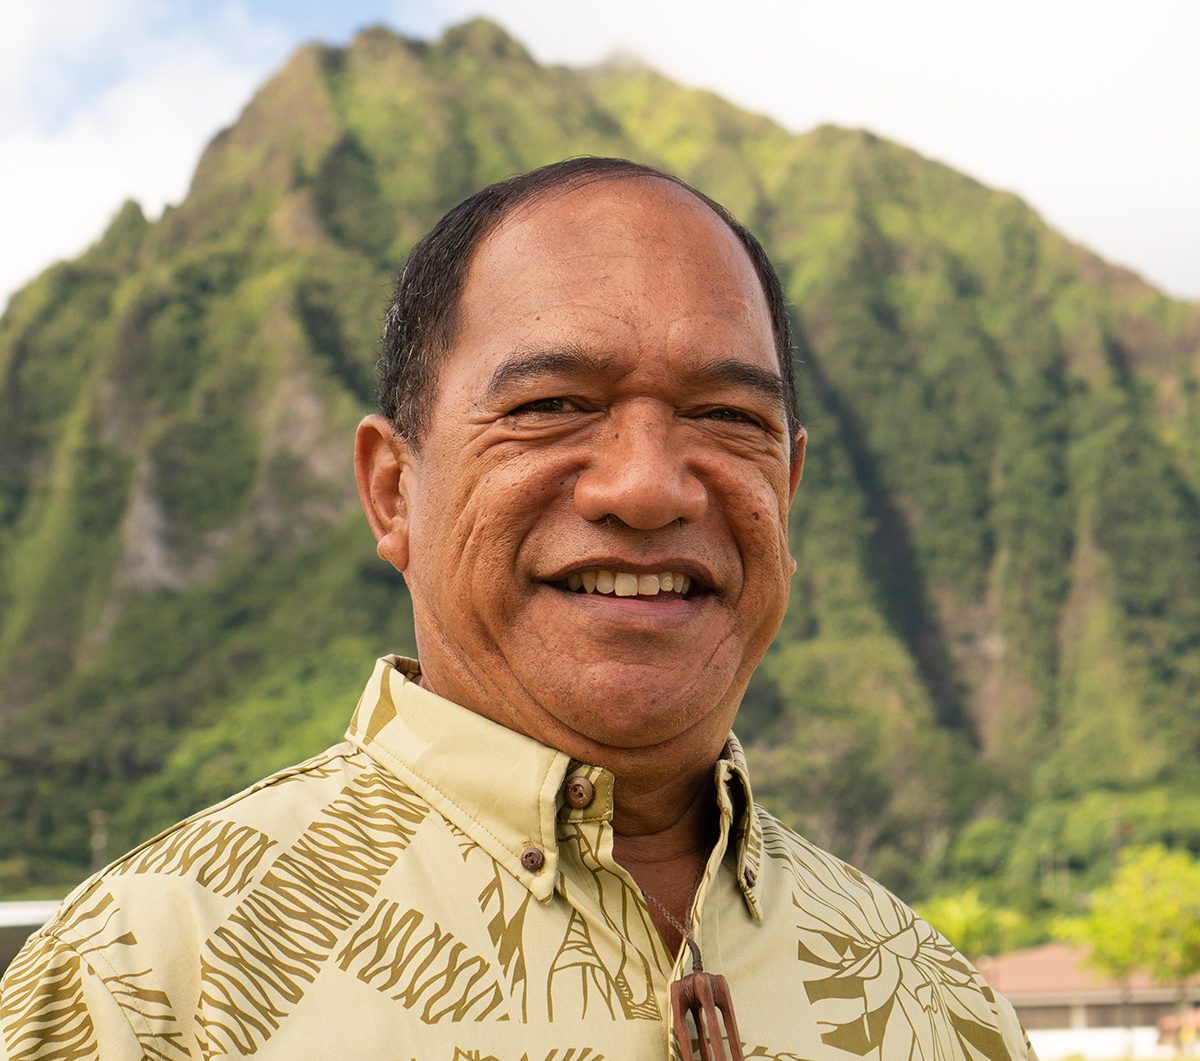 Kimo Adams standing with Koolau mountains behind him in the sun